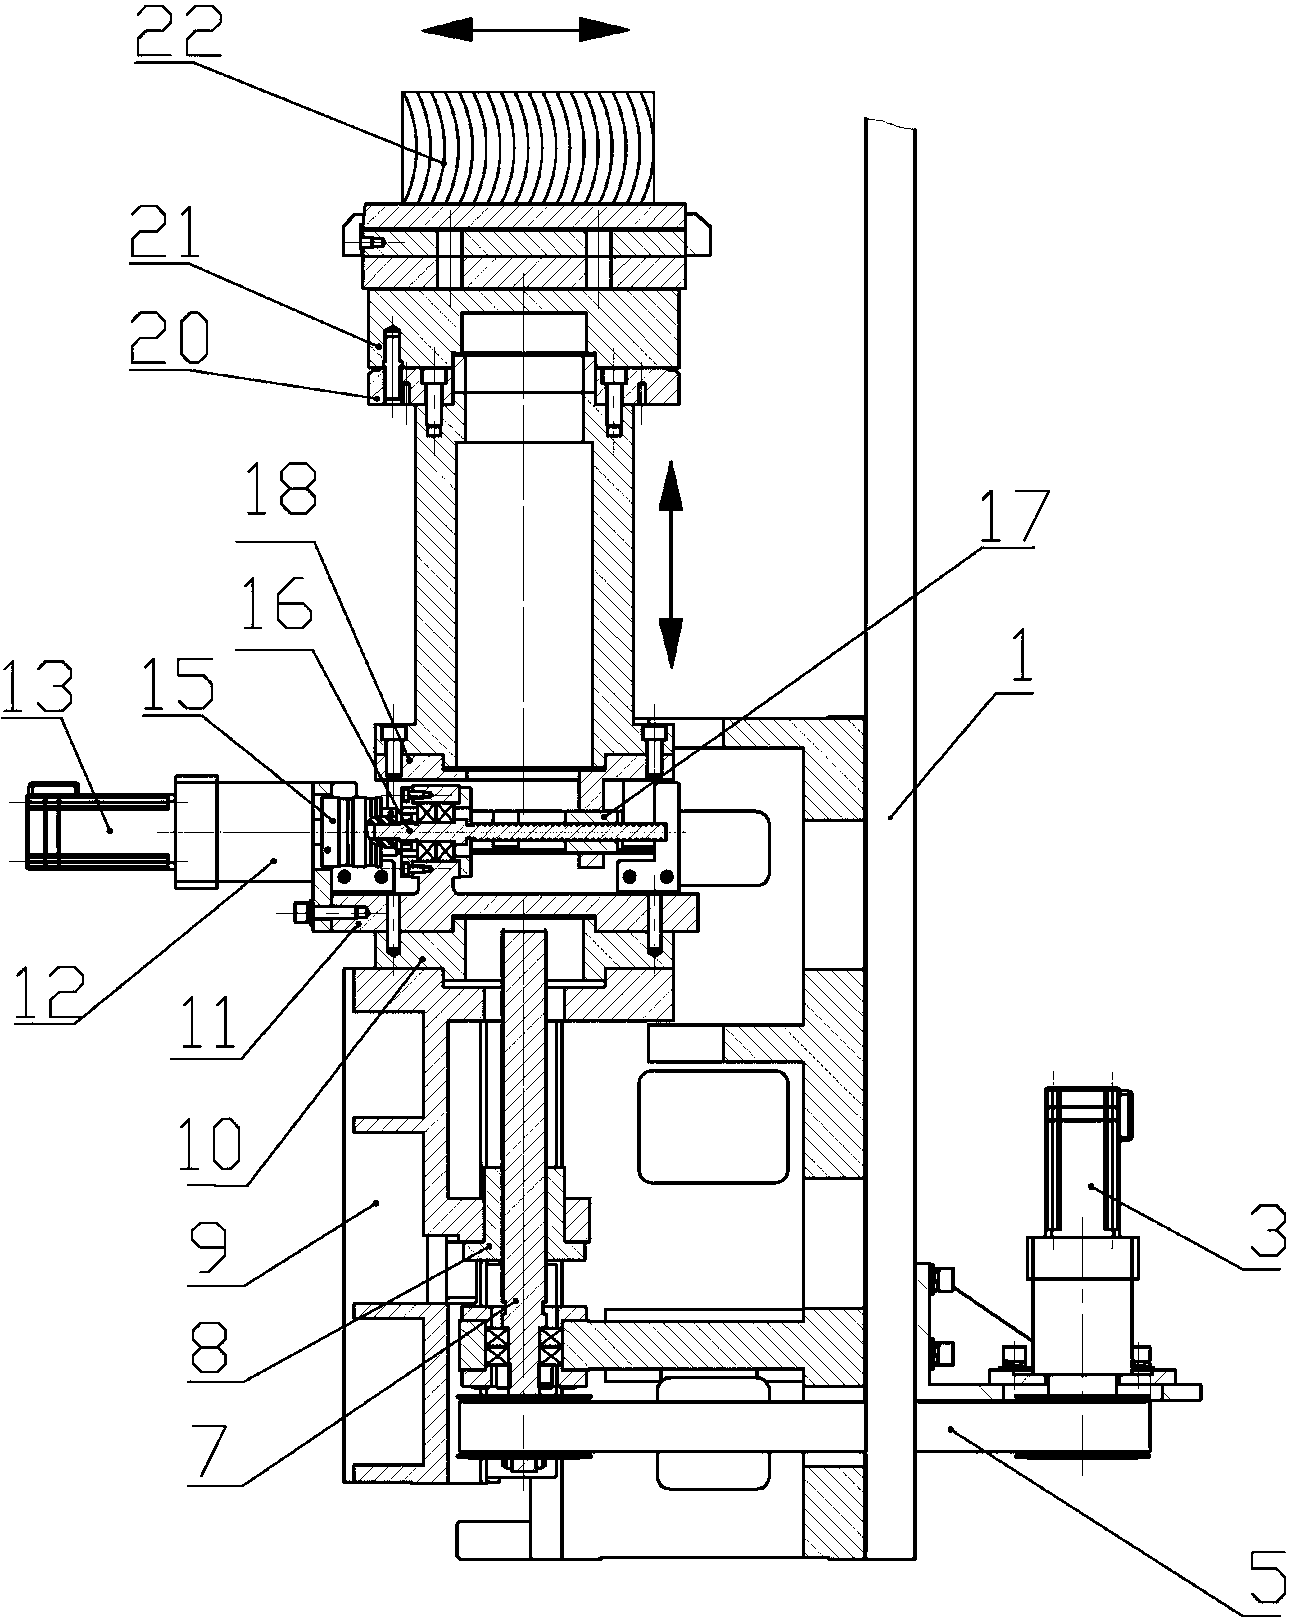 Worktable of multi-wire sawing machine